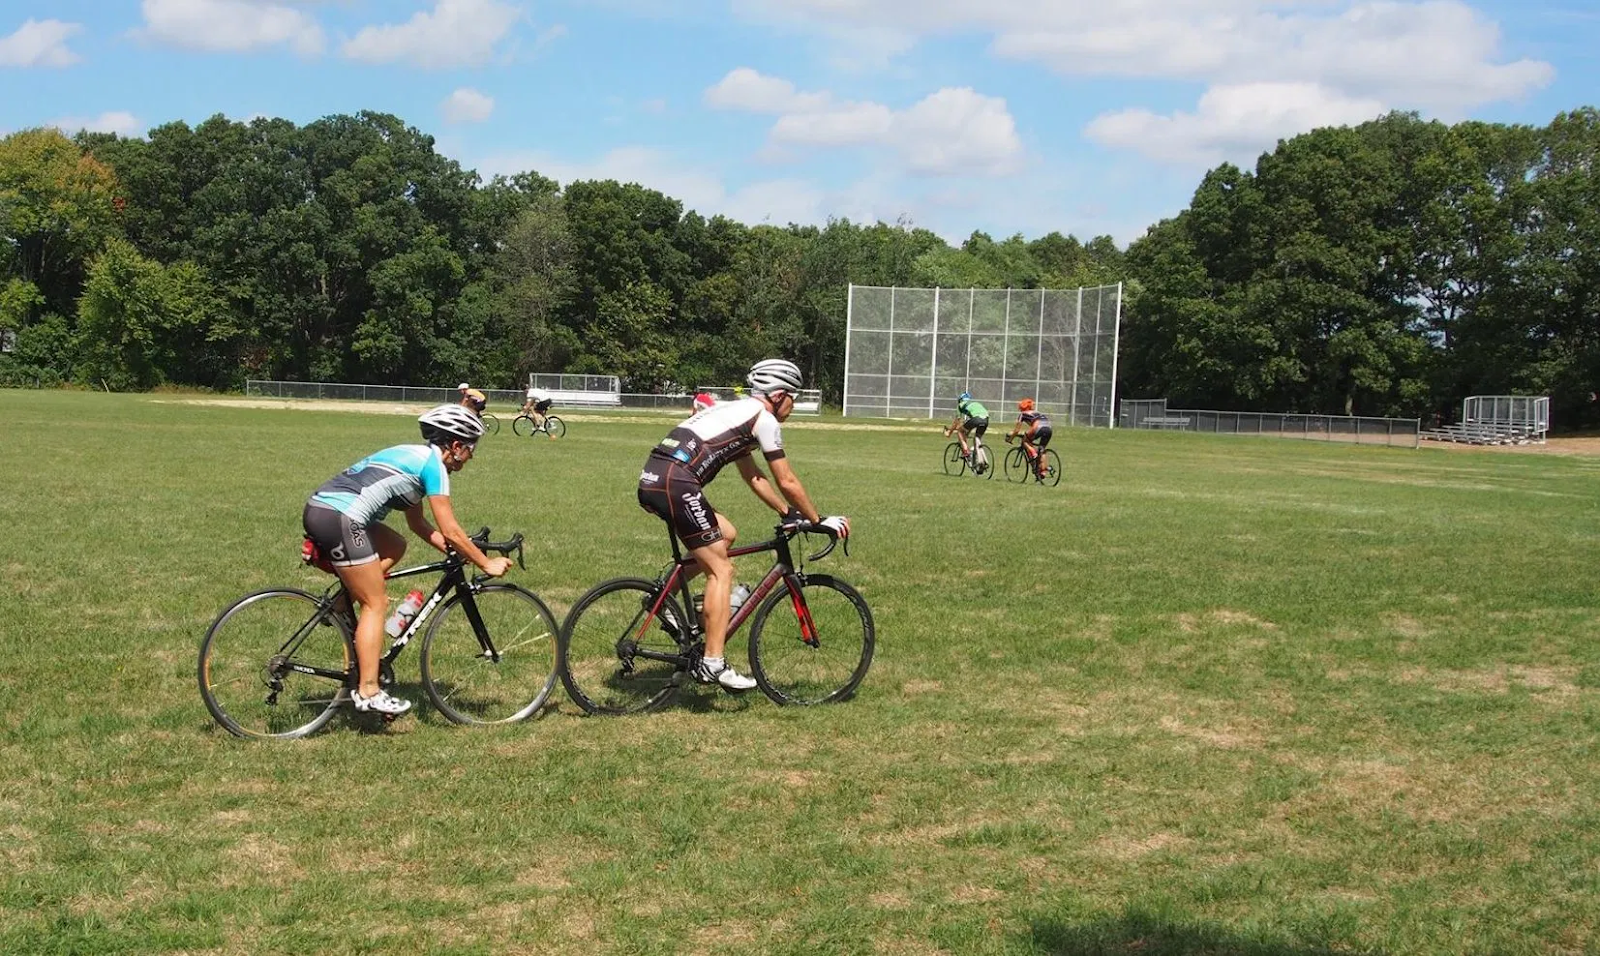 Bike handling skills practiced at the USA Cycling Coaching Certification Clinic